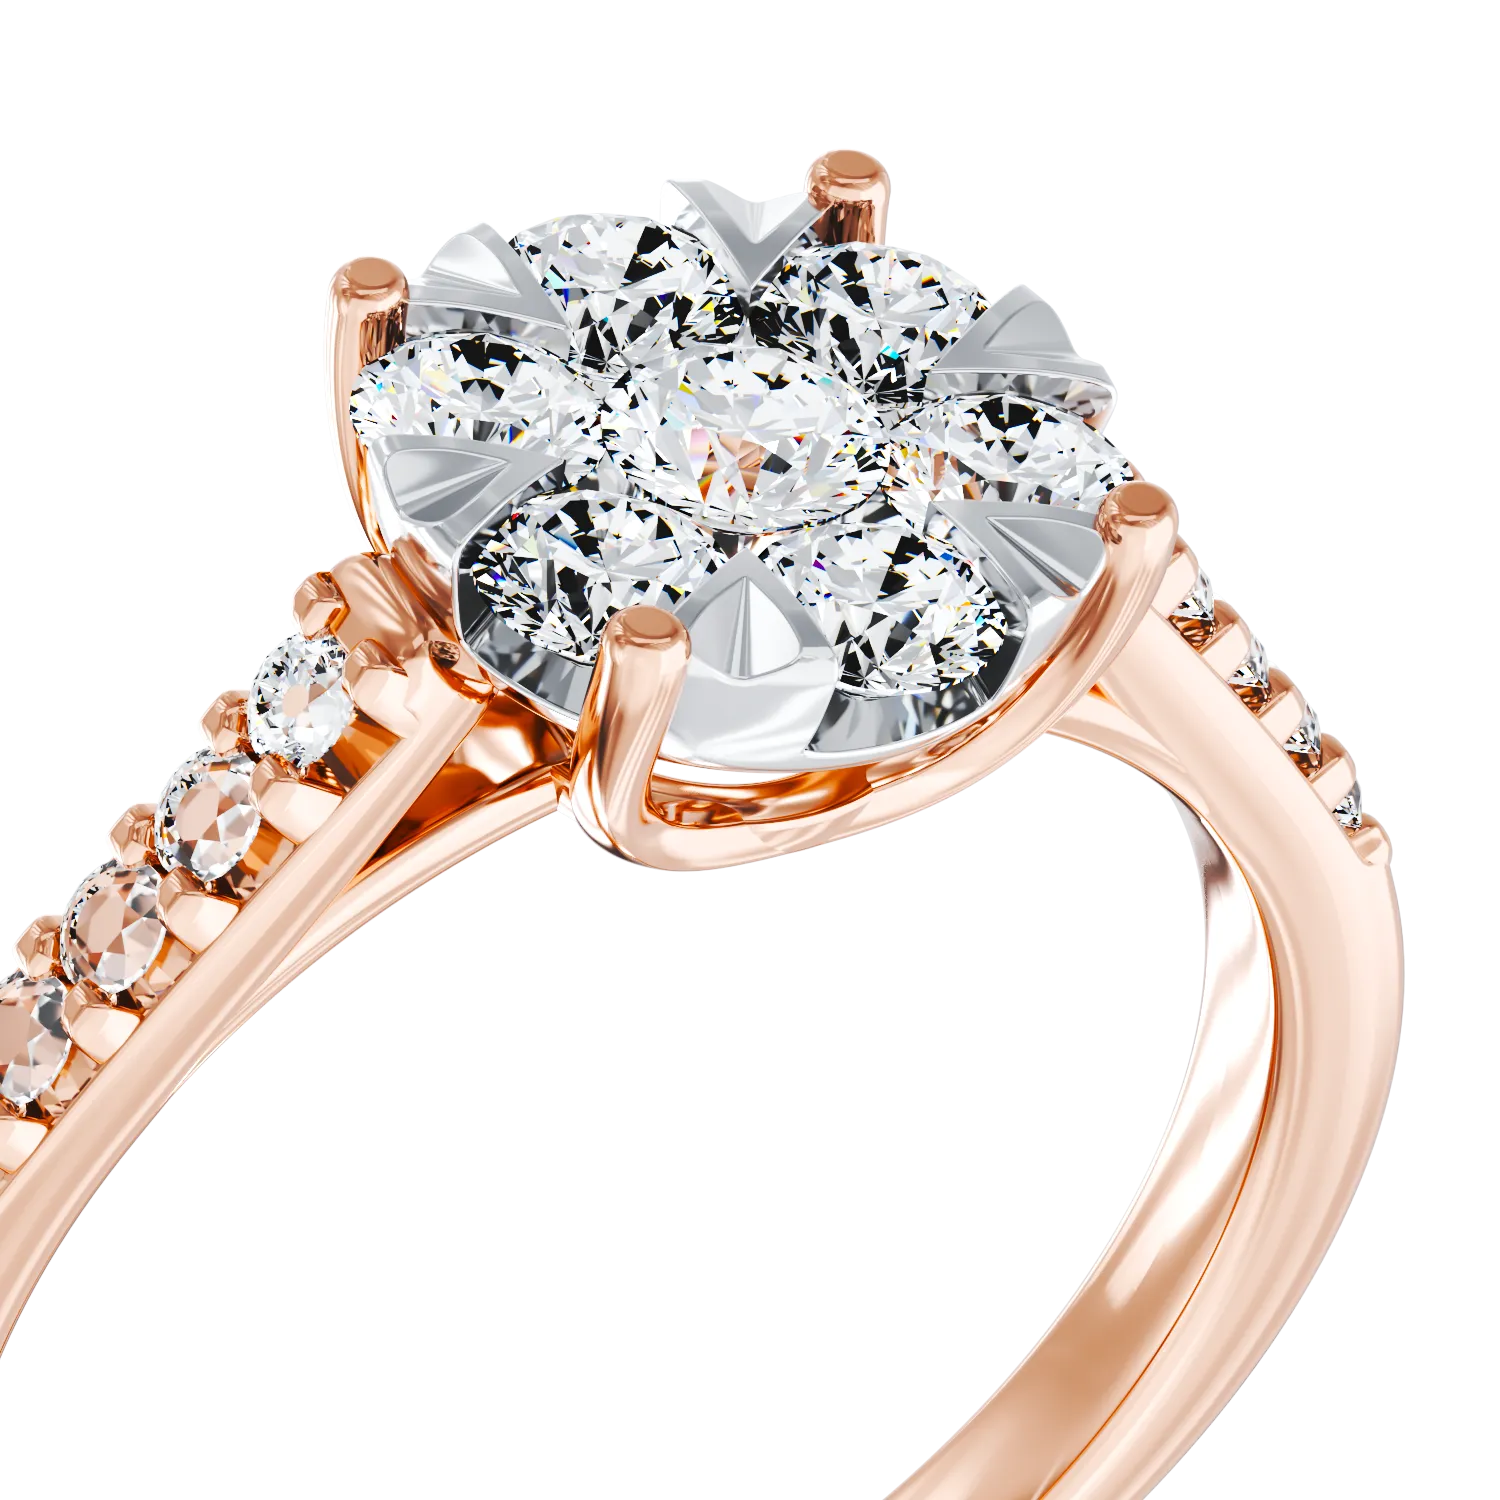 18K rose gold engagement ring with 0.5ct diamonds